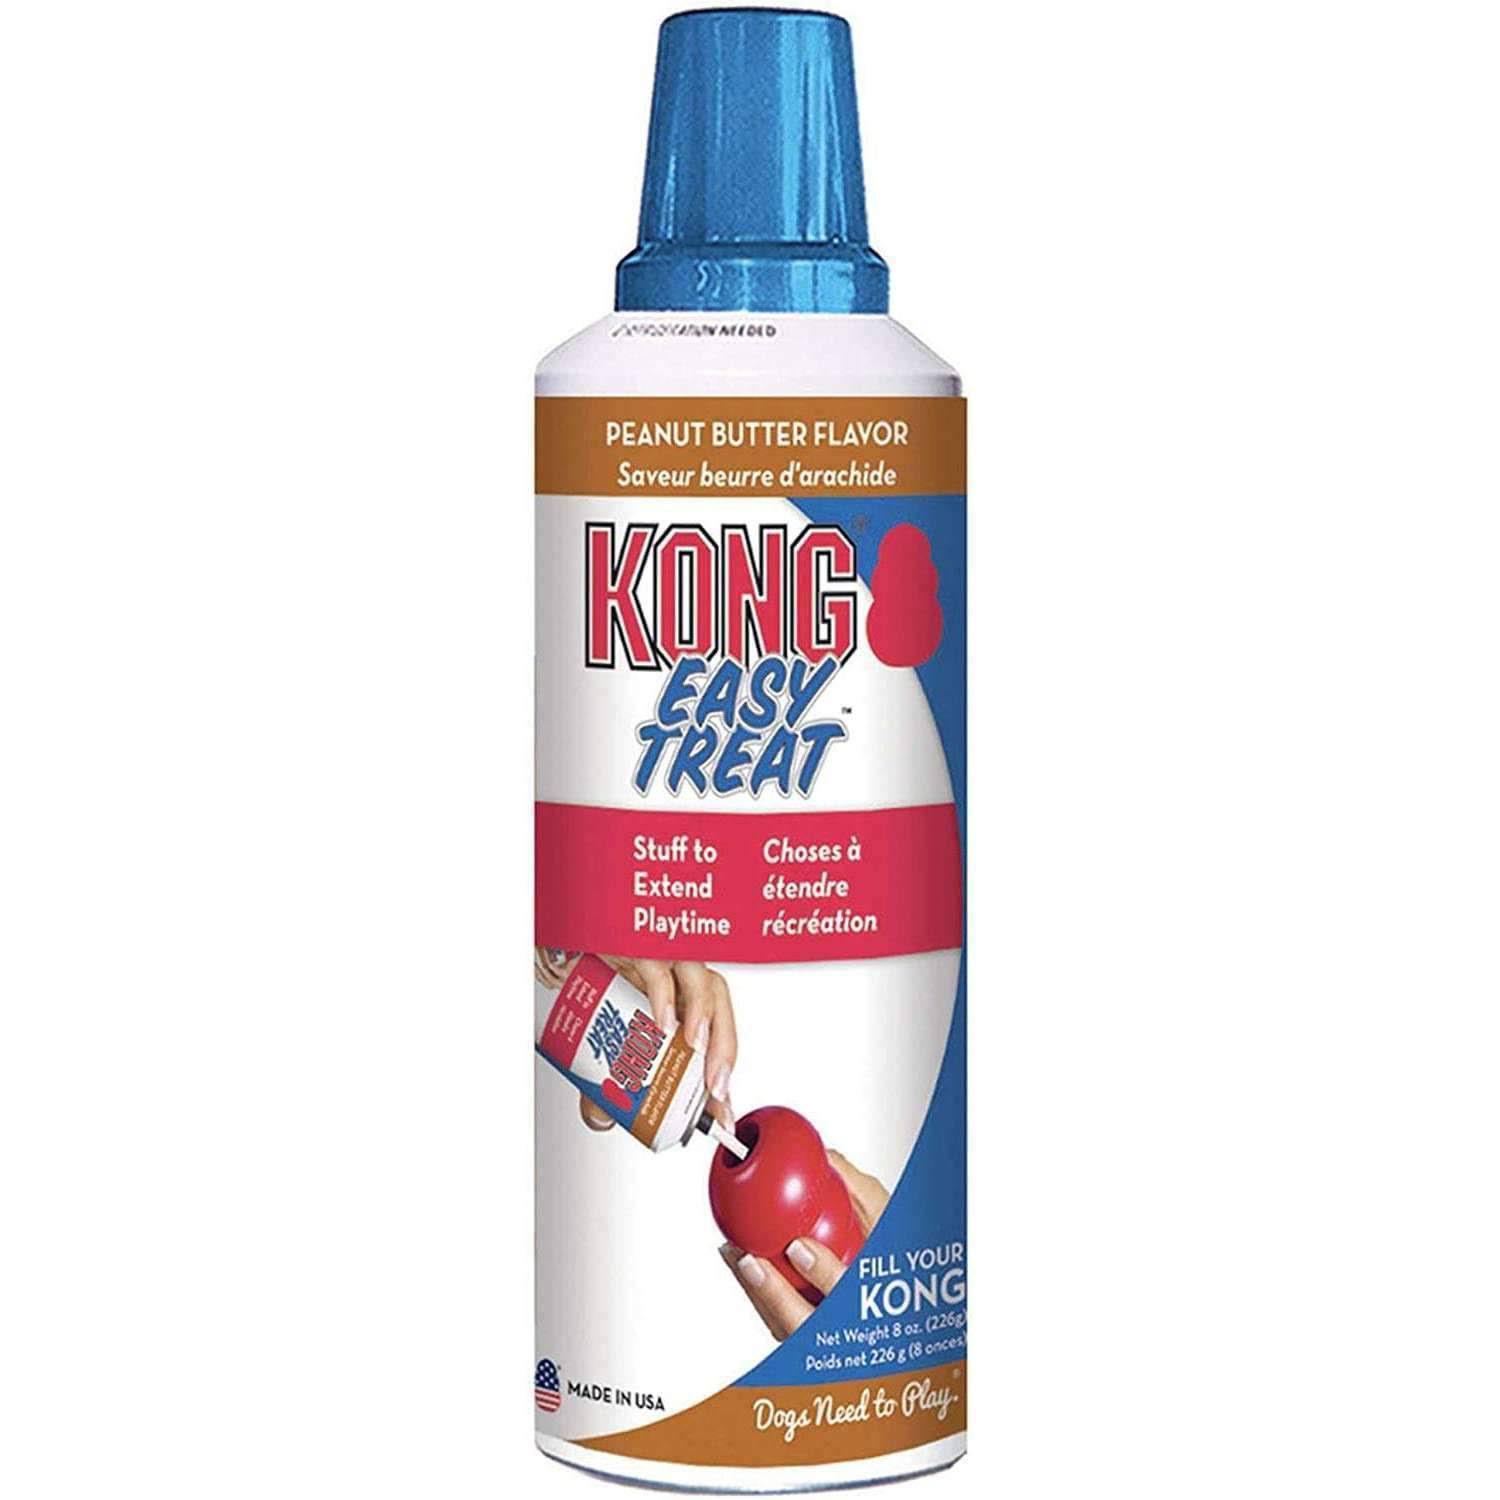 Kong Stuff'n Easy Treat for Dogs - Peanut Butter, 8oz